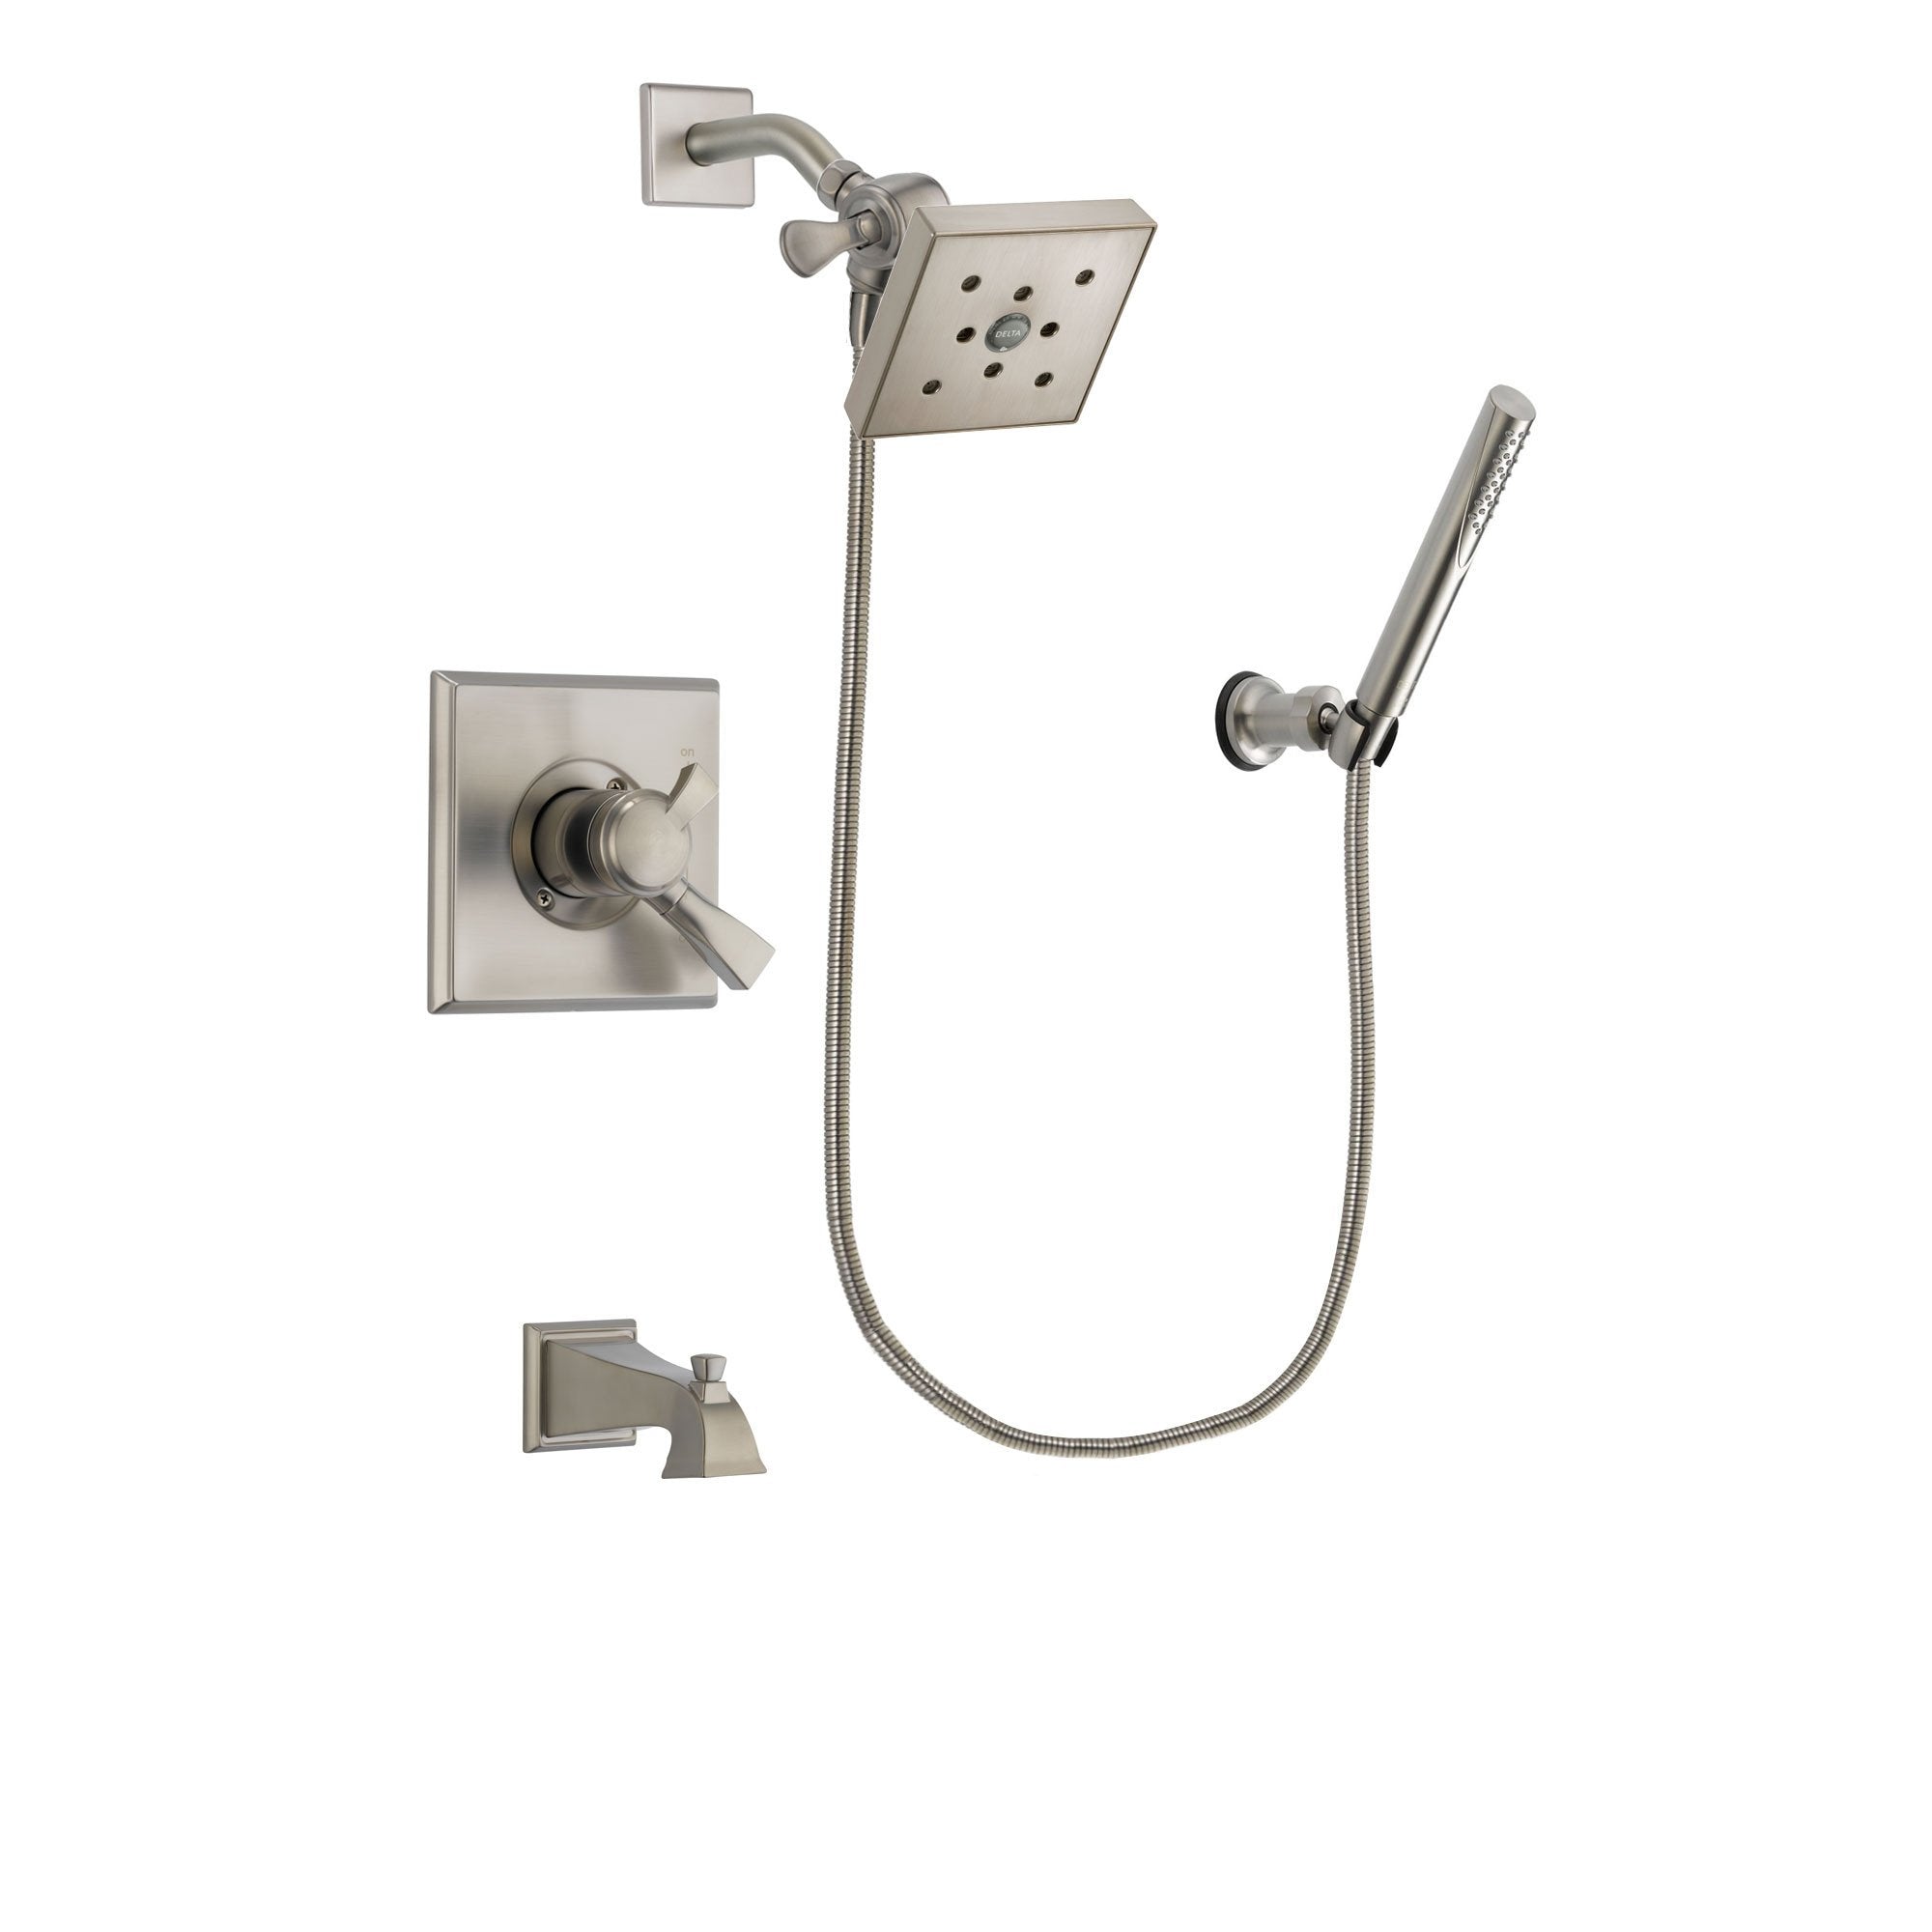 Delta Dryden Stainless Steel Finish Tub and Shower System w/Hand Shower DSP2159V